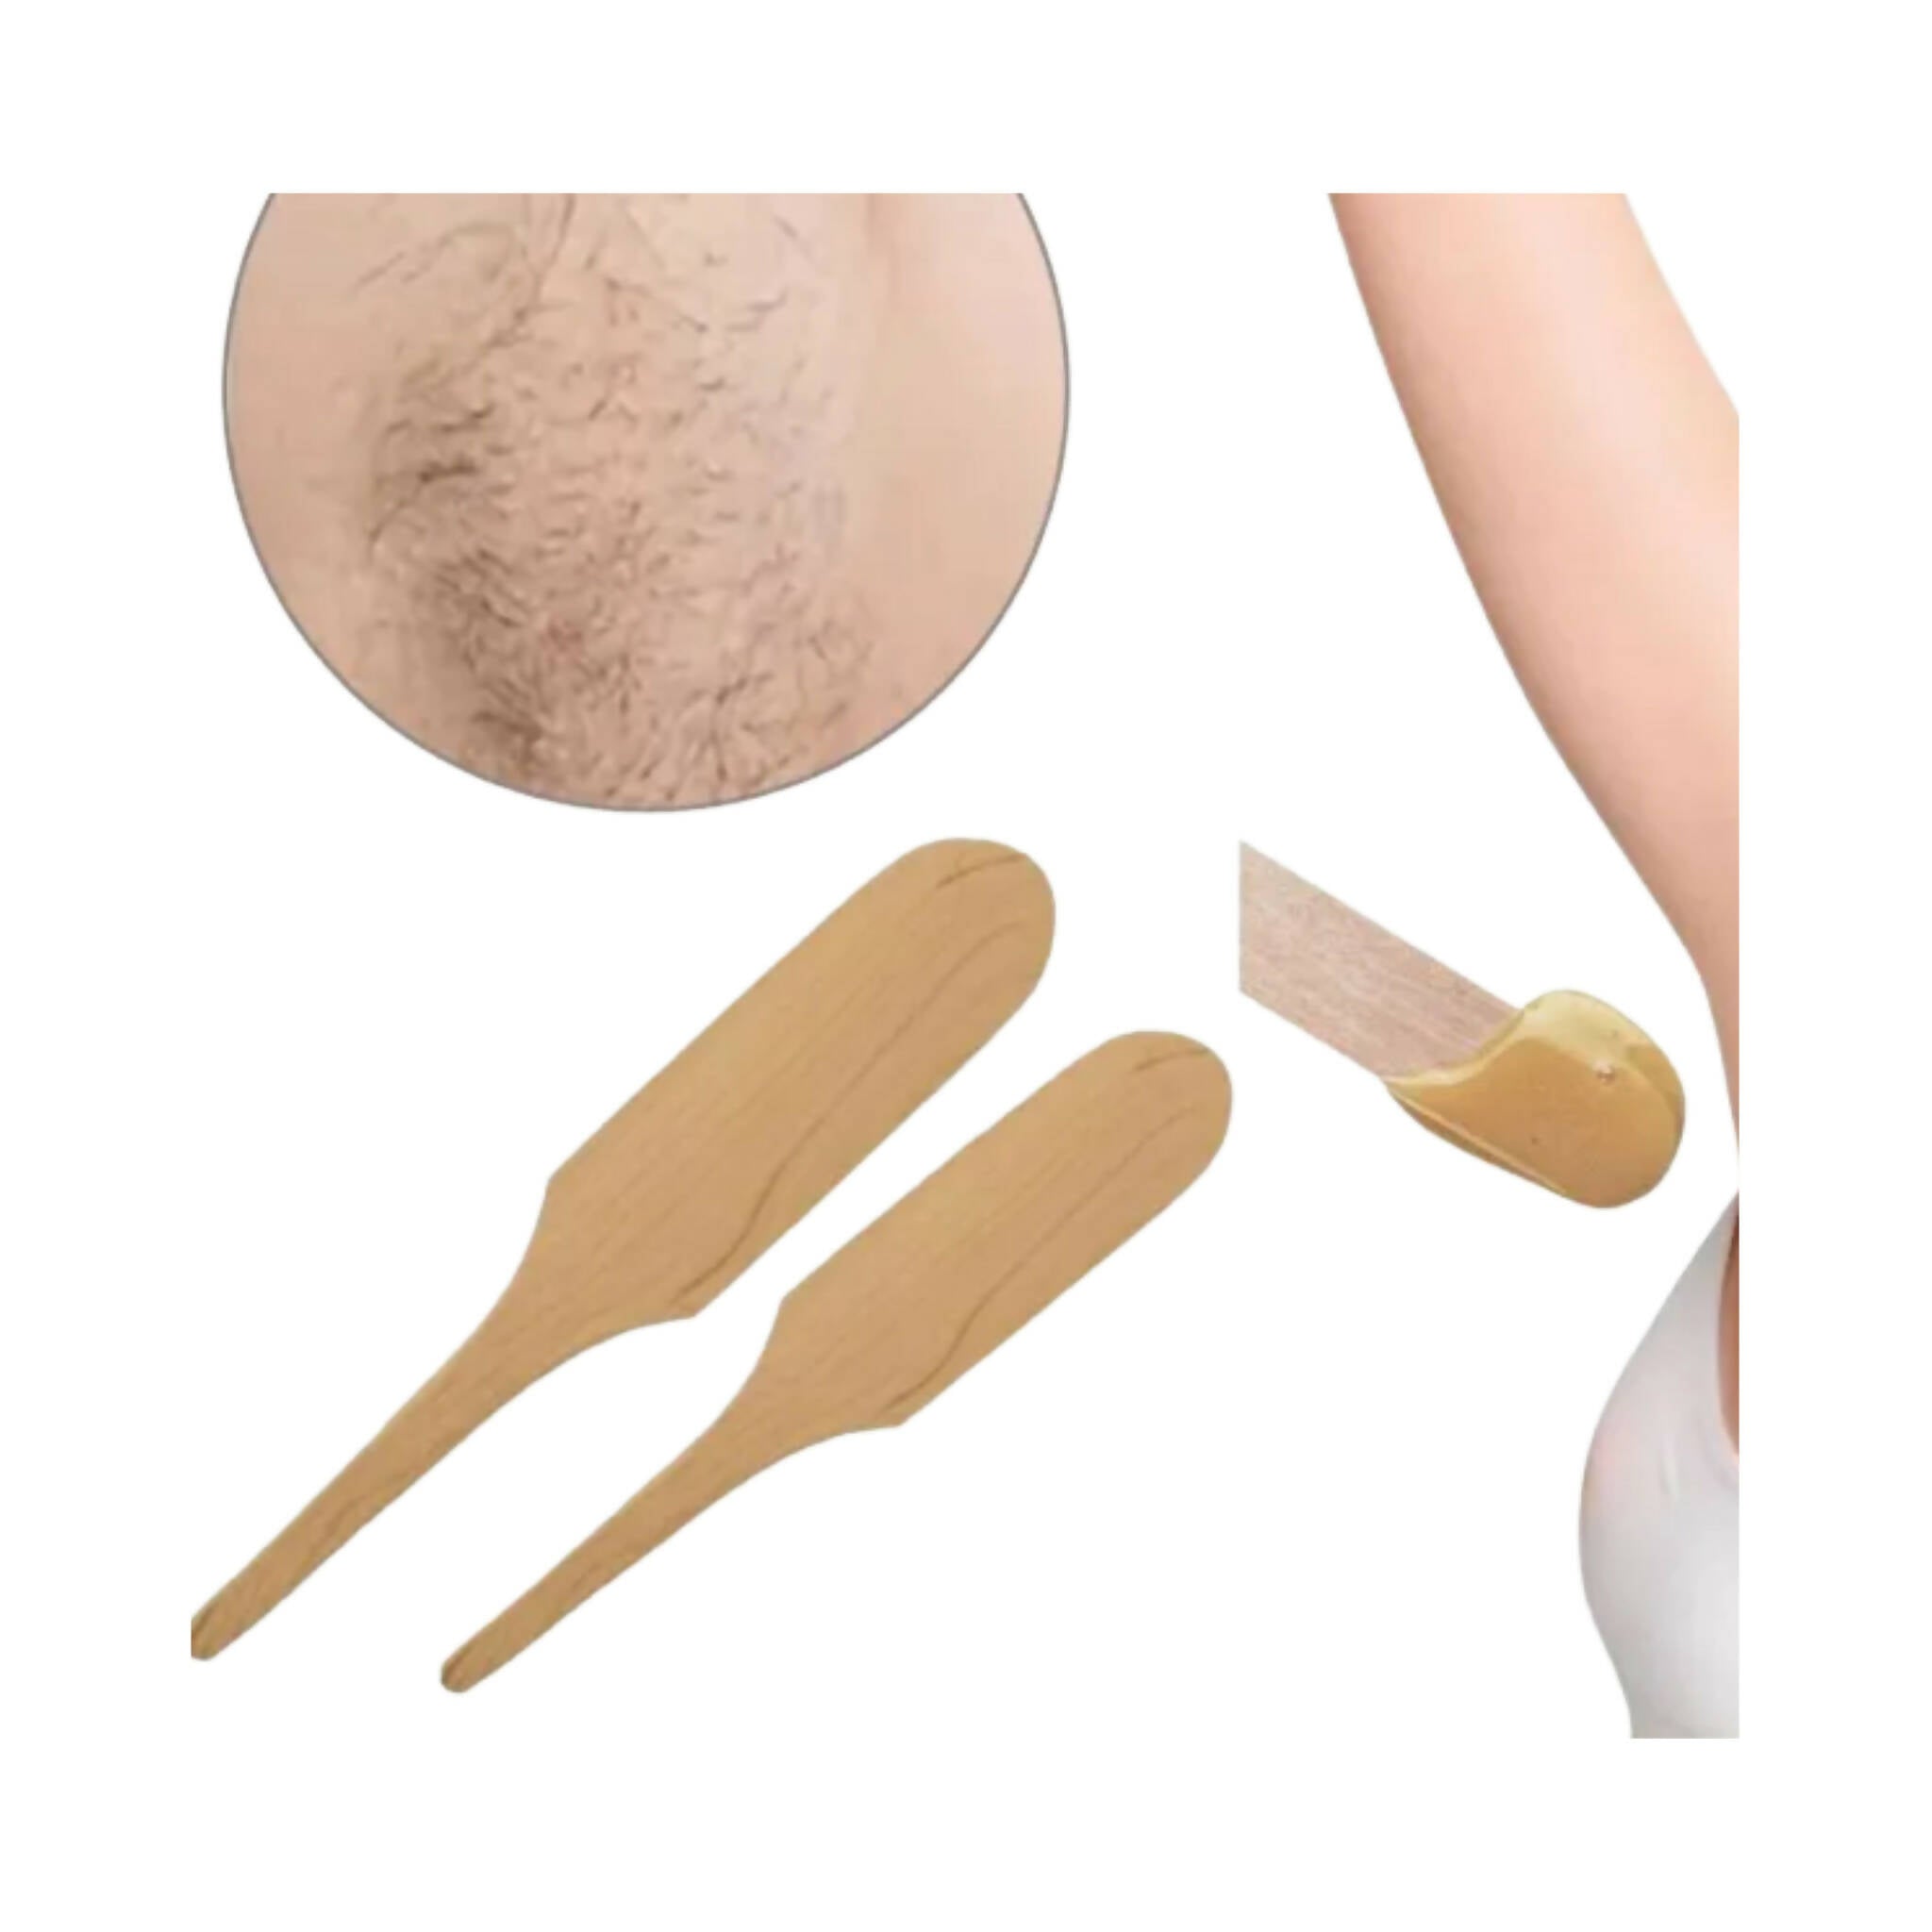 Wax Spatula, Special Wax & Lightweight, for All Types Of Hair Removal